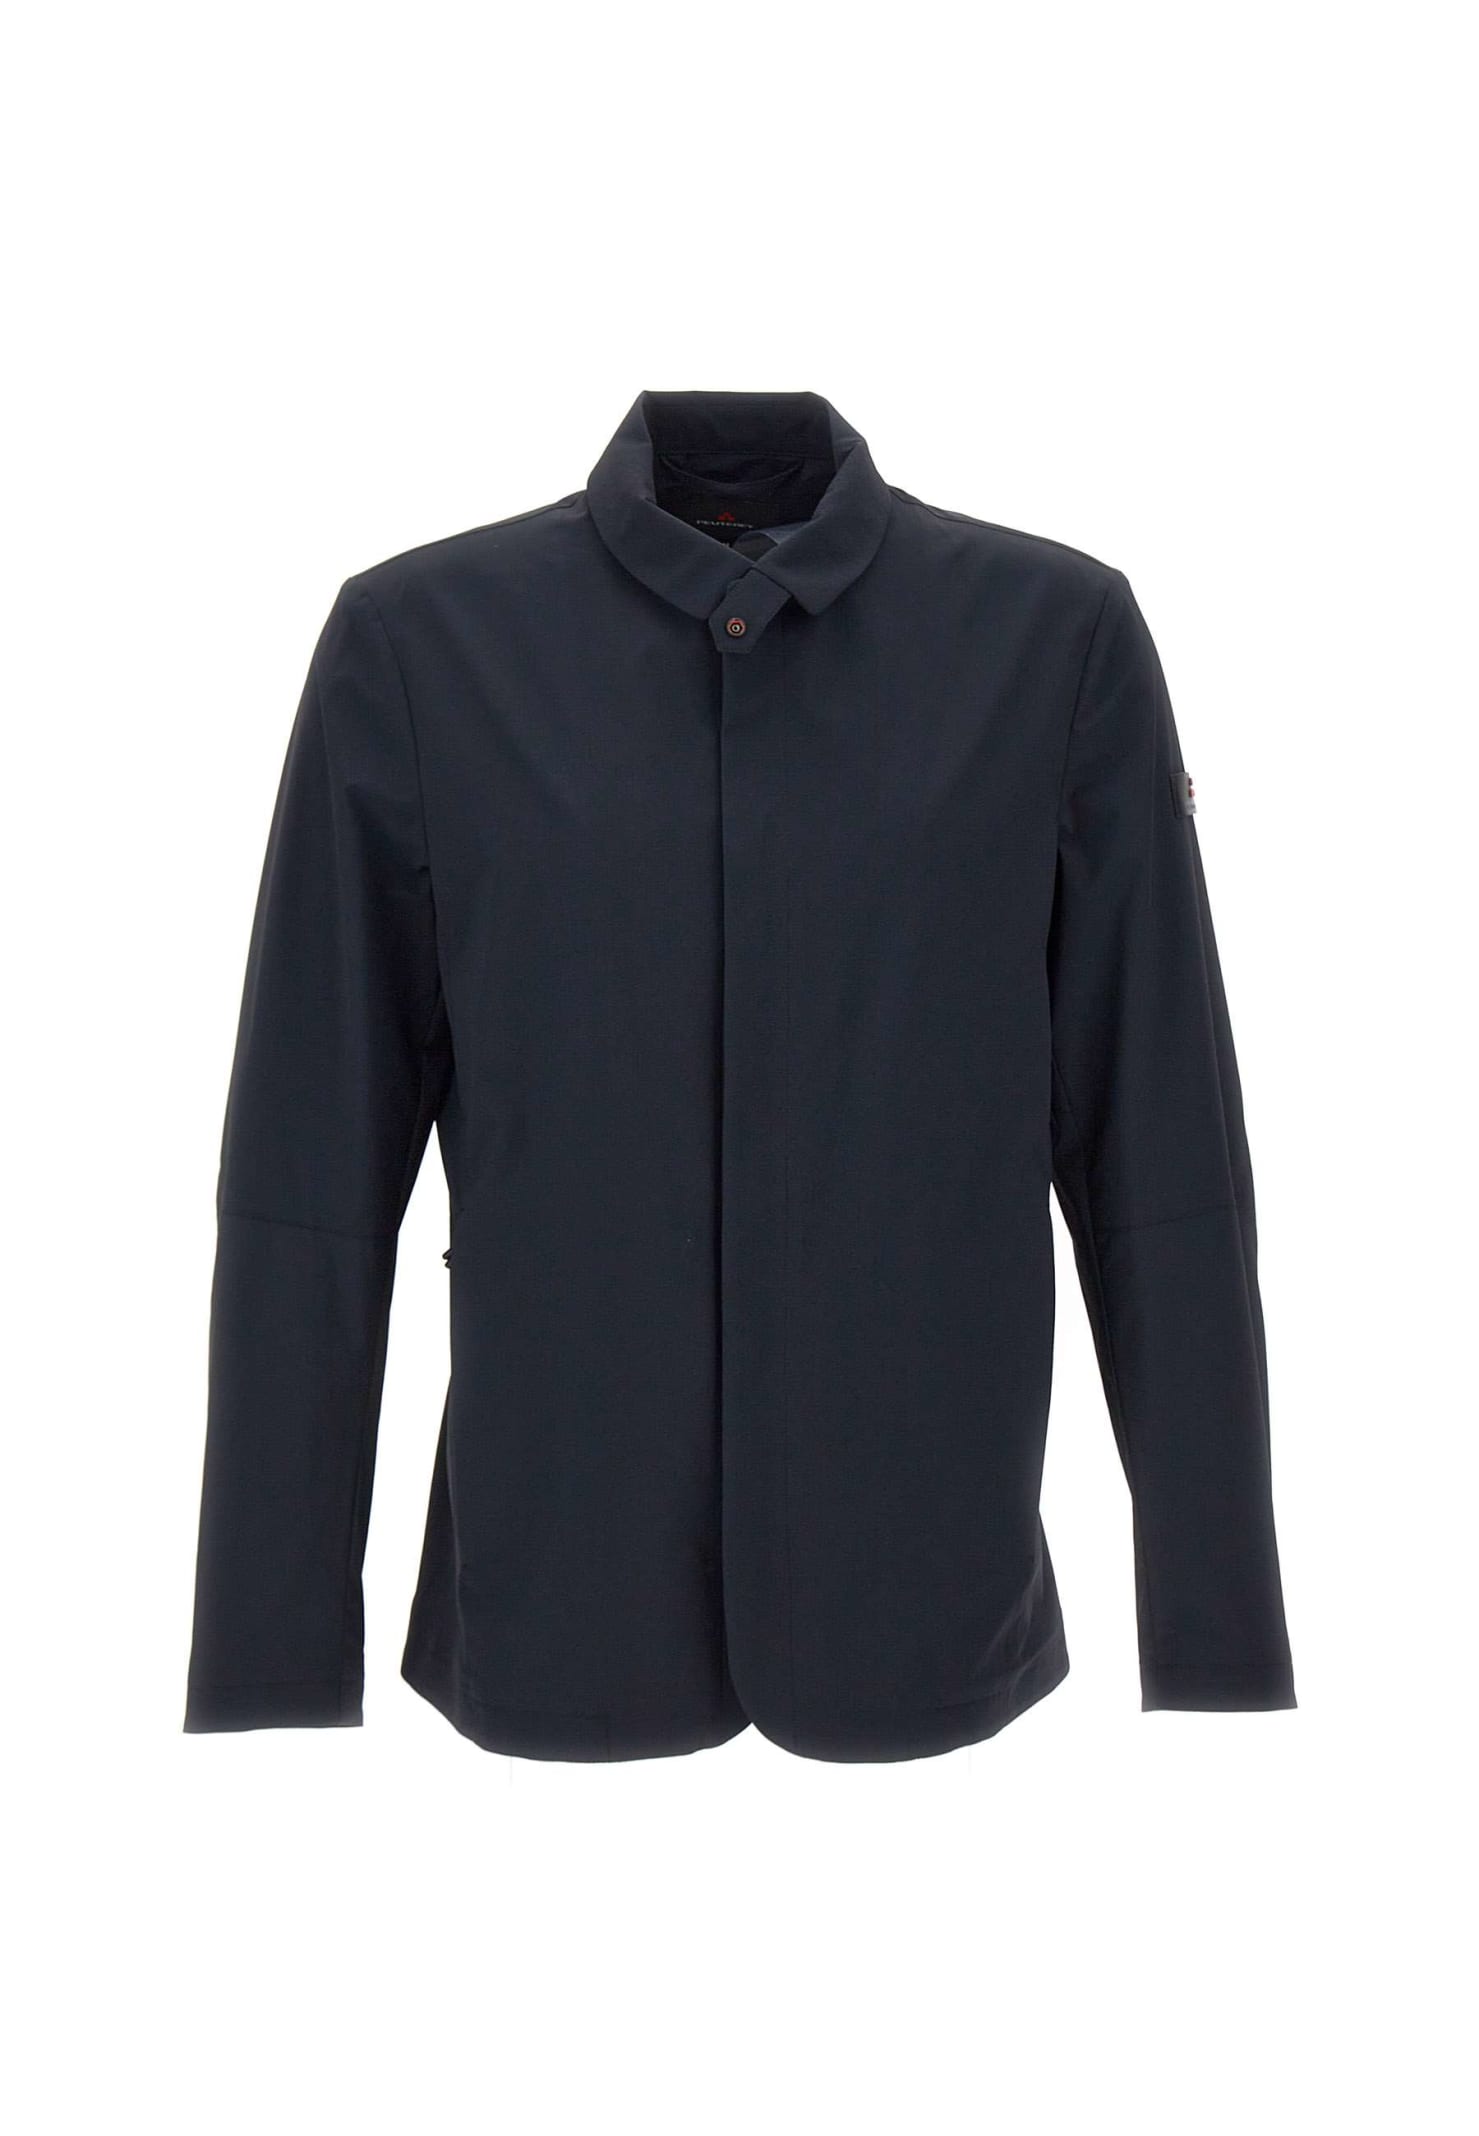 Peuterey Coghinas Jacket In Blue